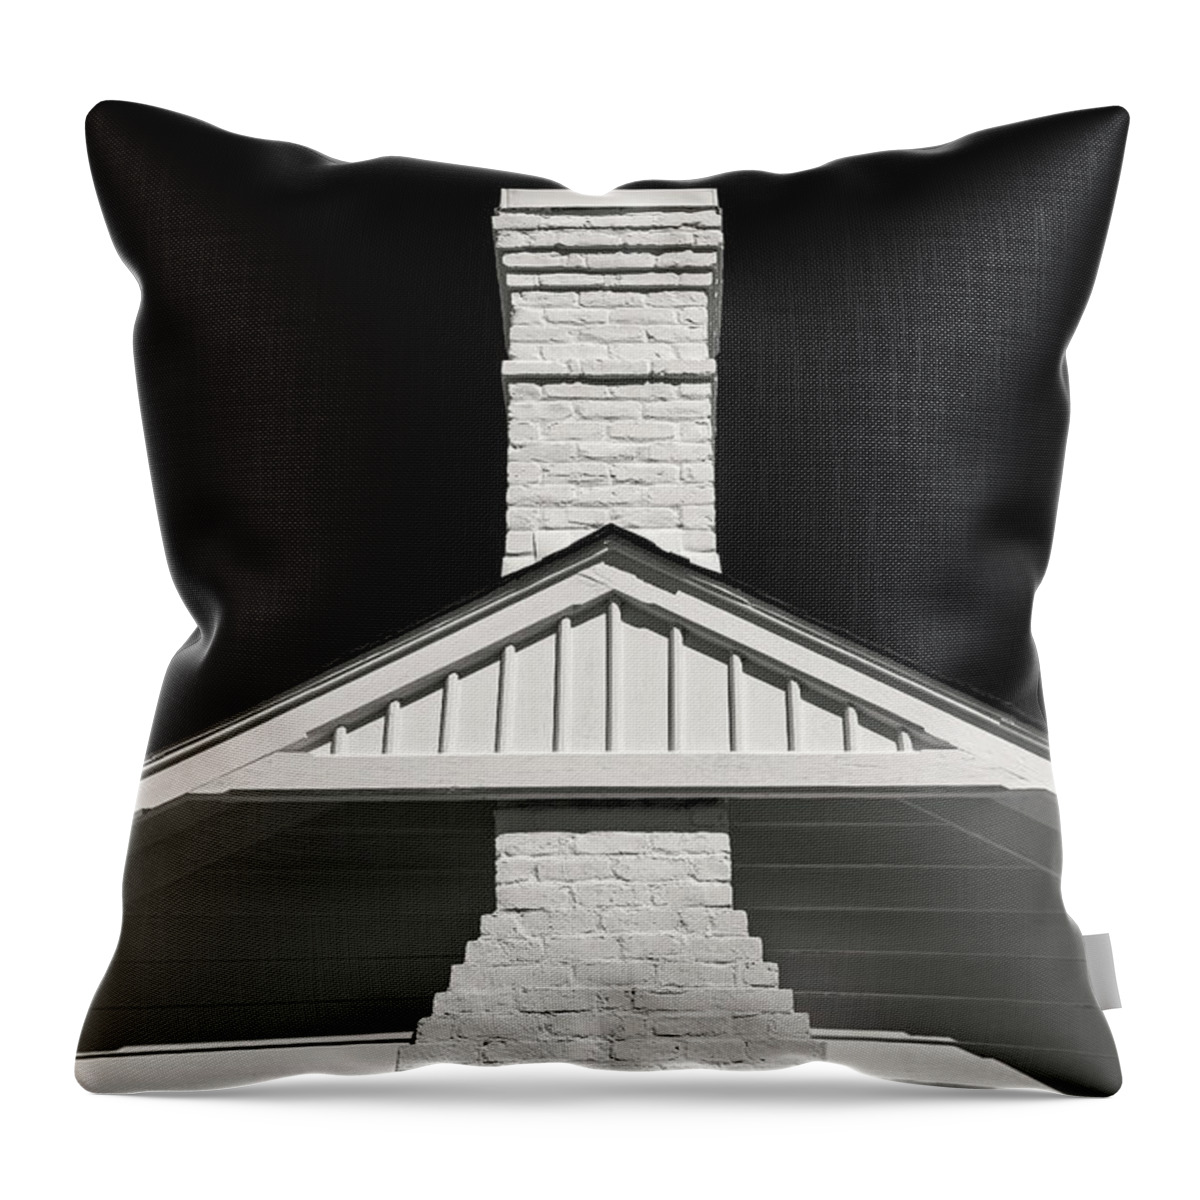 Chimney Throw Pillow featuring the photograph Savannah Chimney by Don Johnson